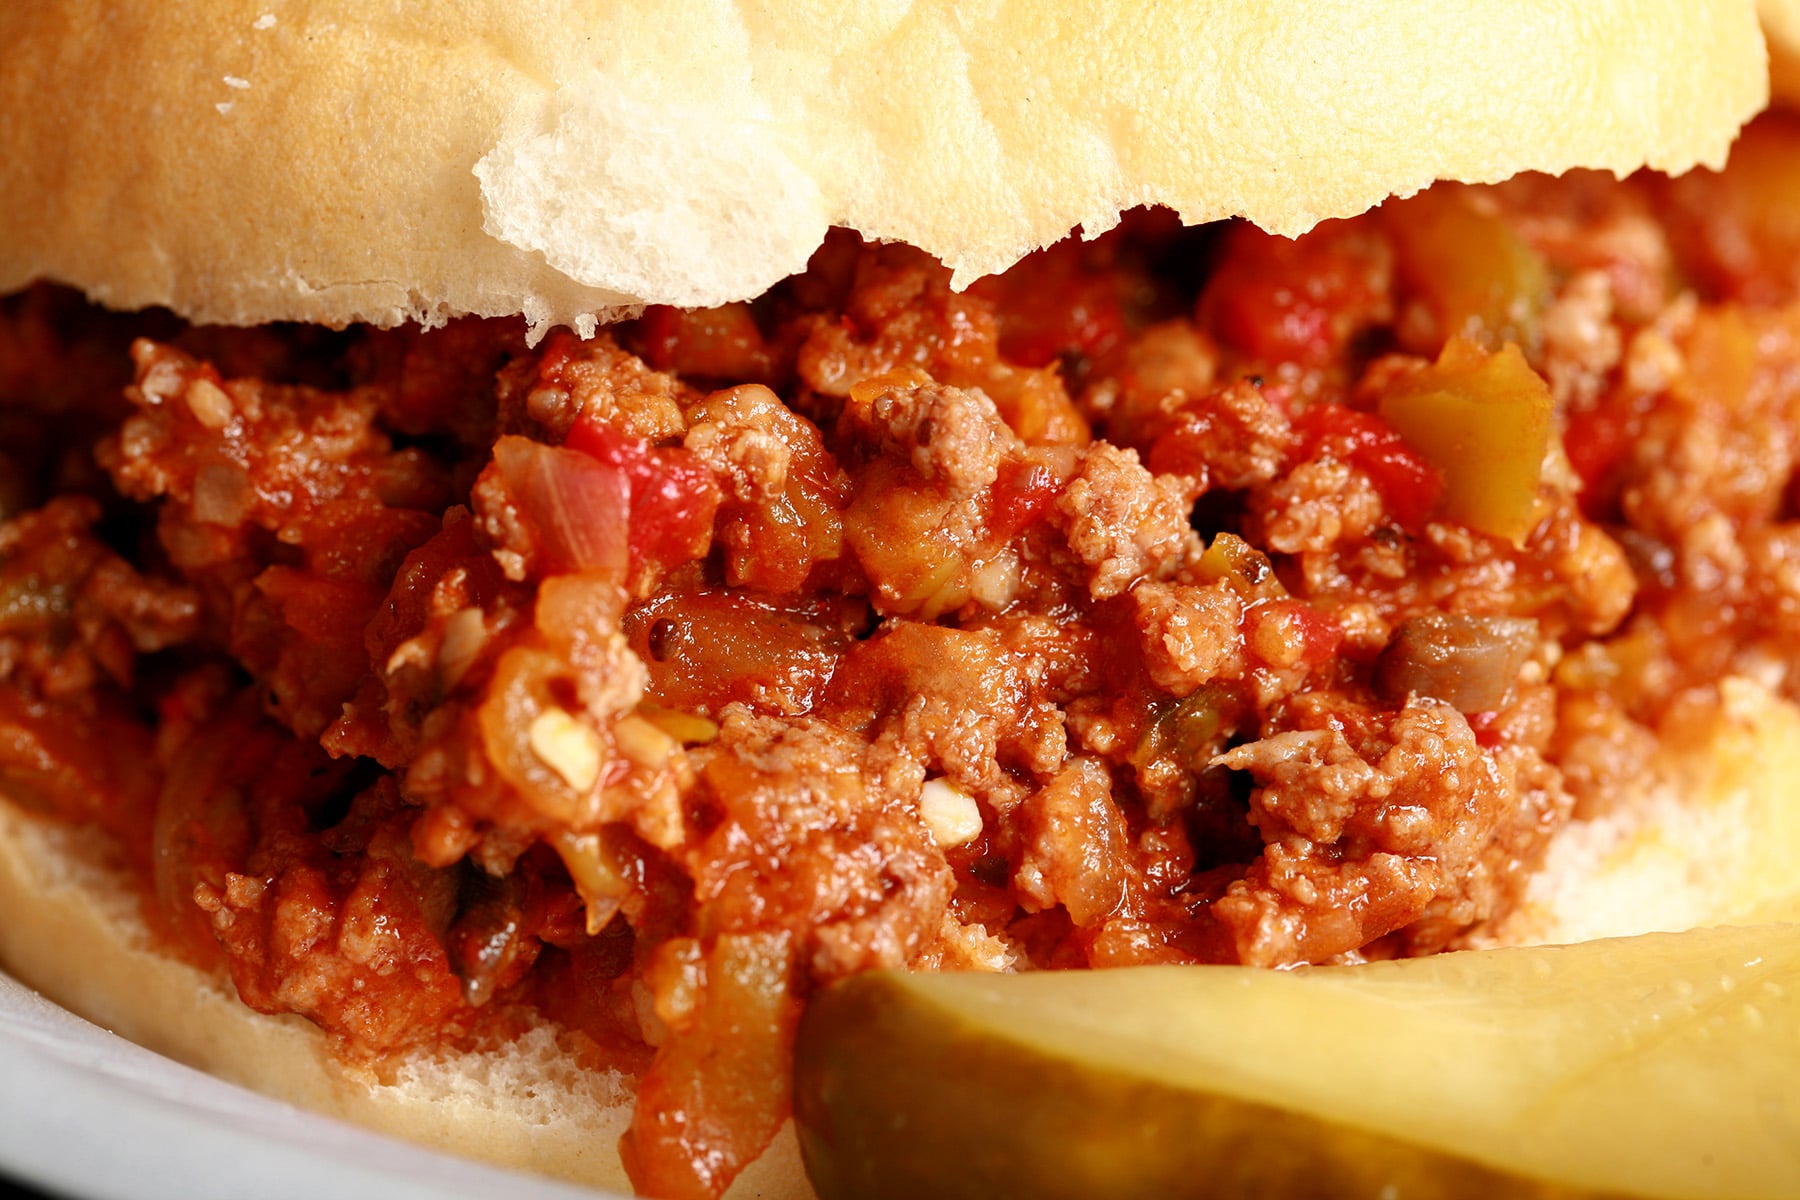 A Homemade Sloppy Joes sandwich on a paper plate, with chips and a pickle spear.